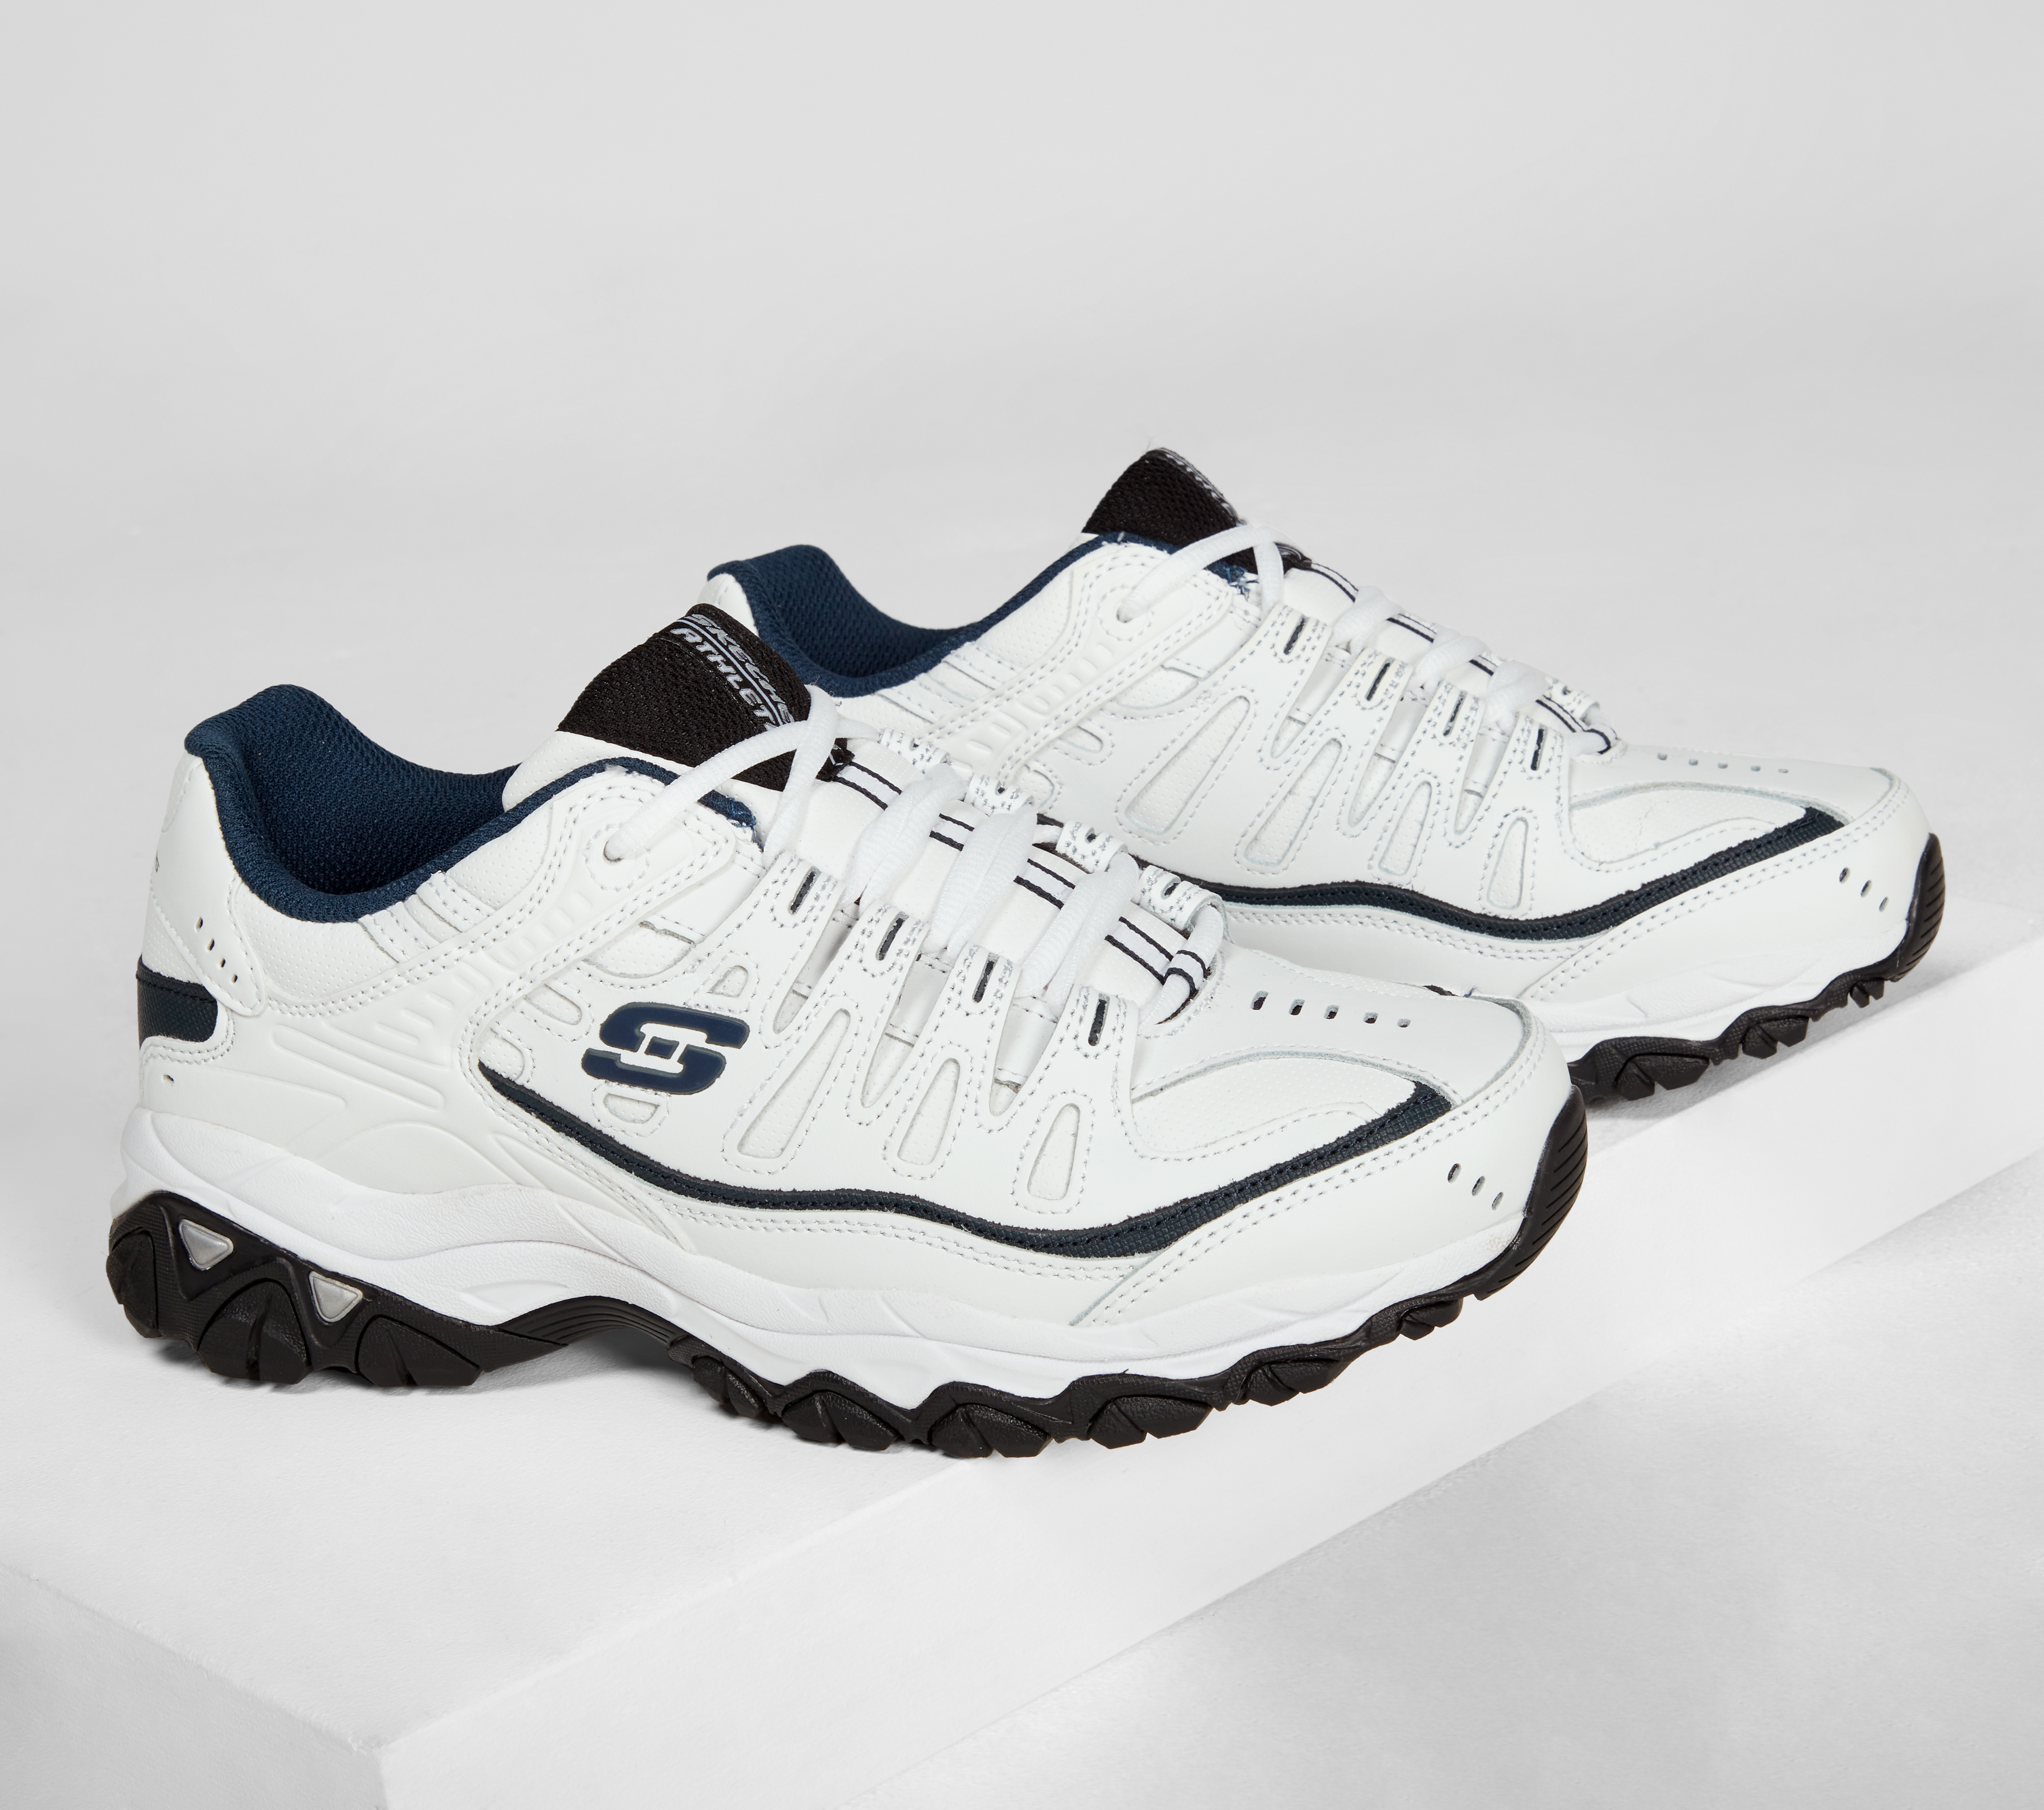 After Fit - Reprint SKECHERS